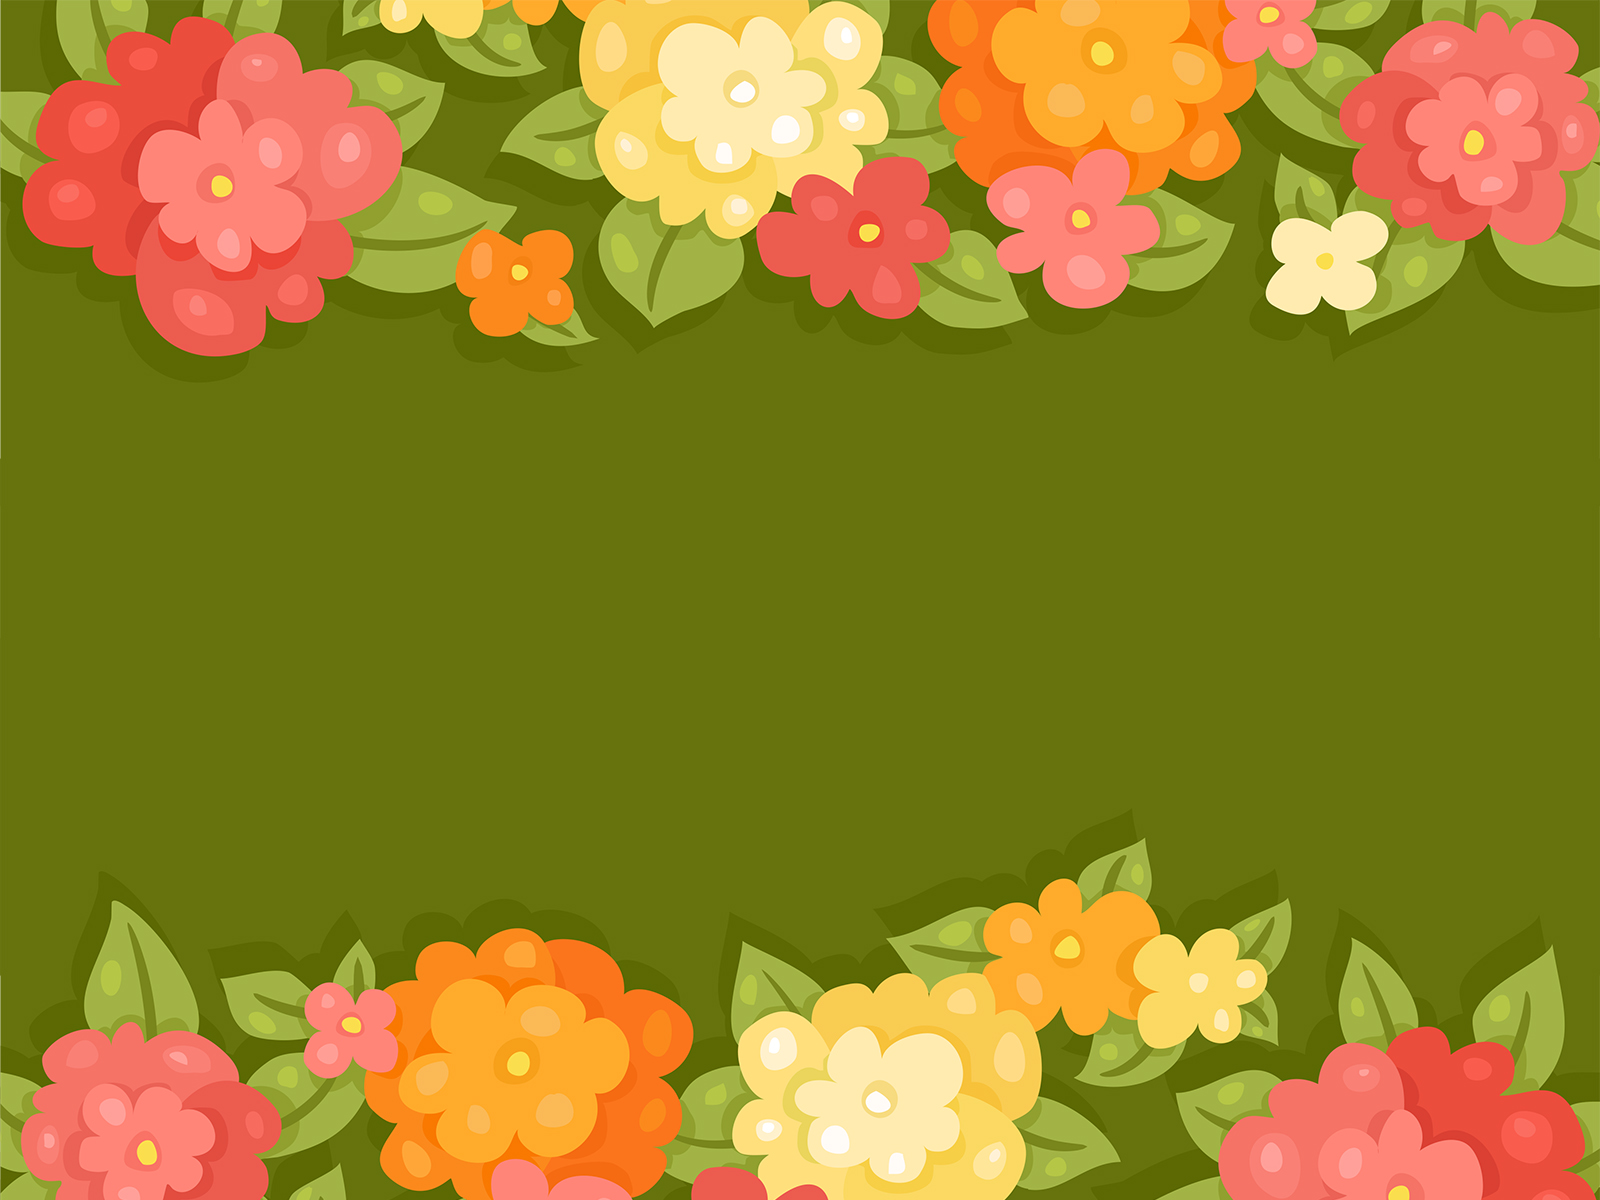 Plants Party Powerpoint Templates - Green, Nature, Yellow - Free PPT  Backgrounds and Templates